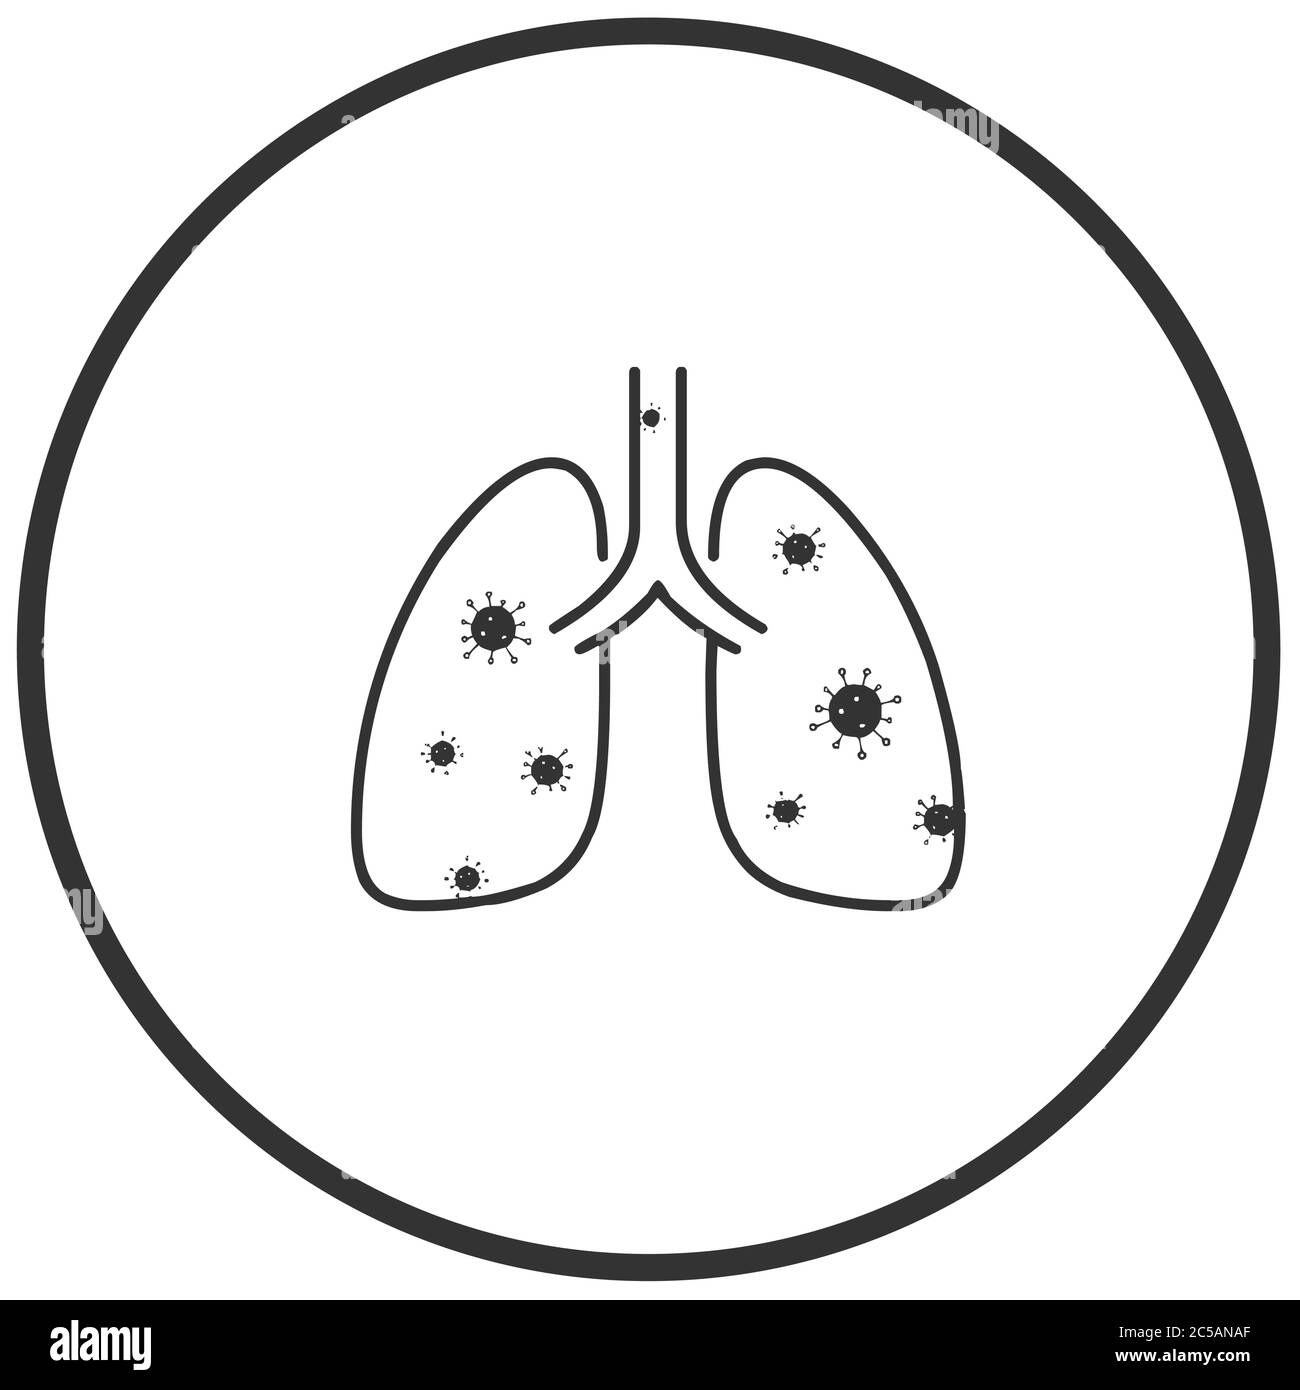 Lungs infected with virus icon vector illustration Stock Vector